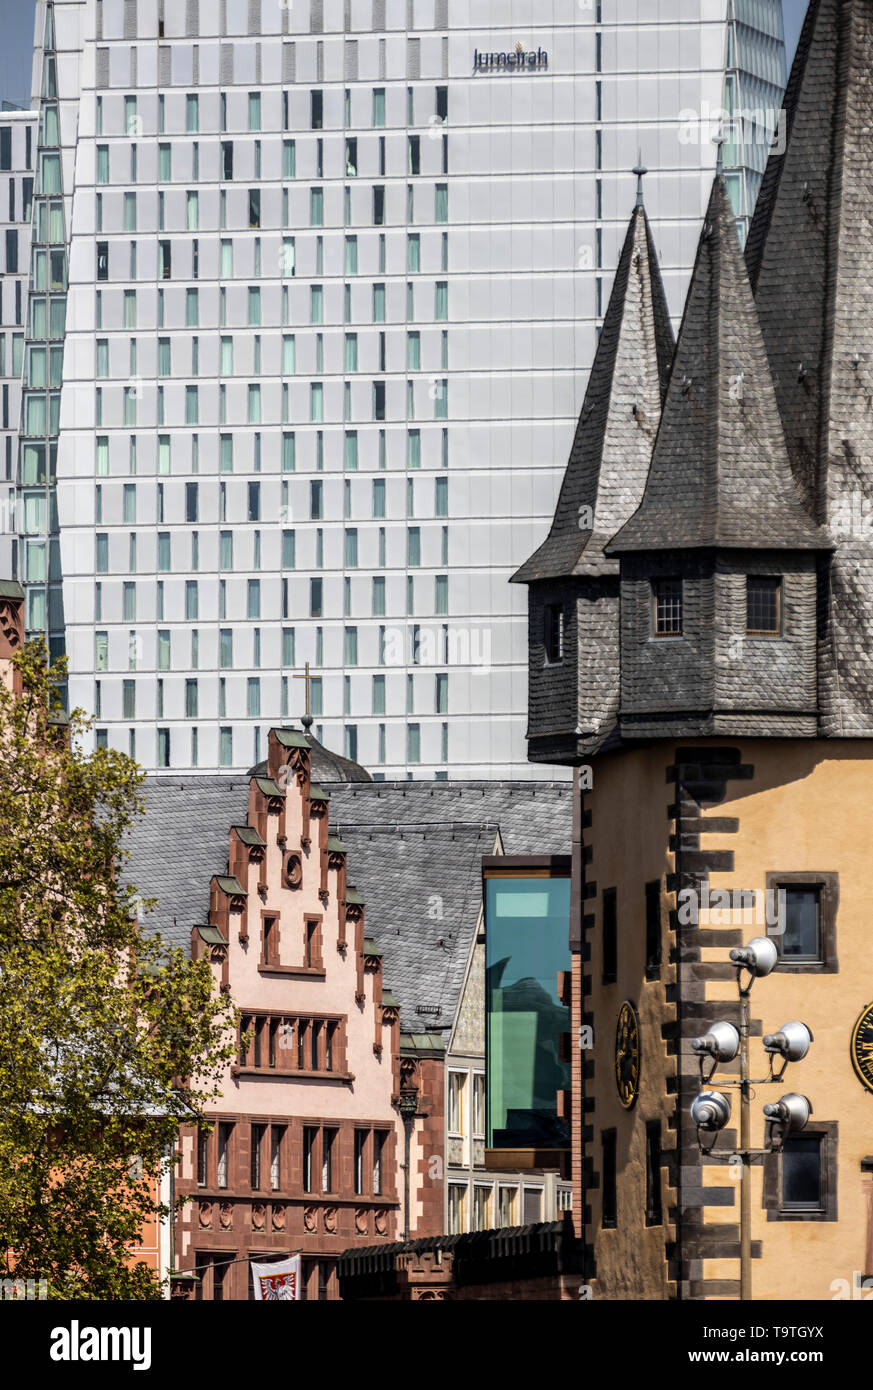 Skyline of Frankfurt am Main, skyscrapers, building contrasts, Jumeirah Hotel, gable faade on the Ršmer, slate tower of the Saalhof, Renten-Zoll-Towe Stock Photo